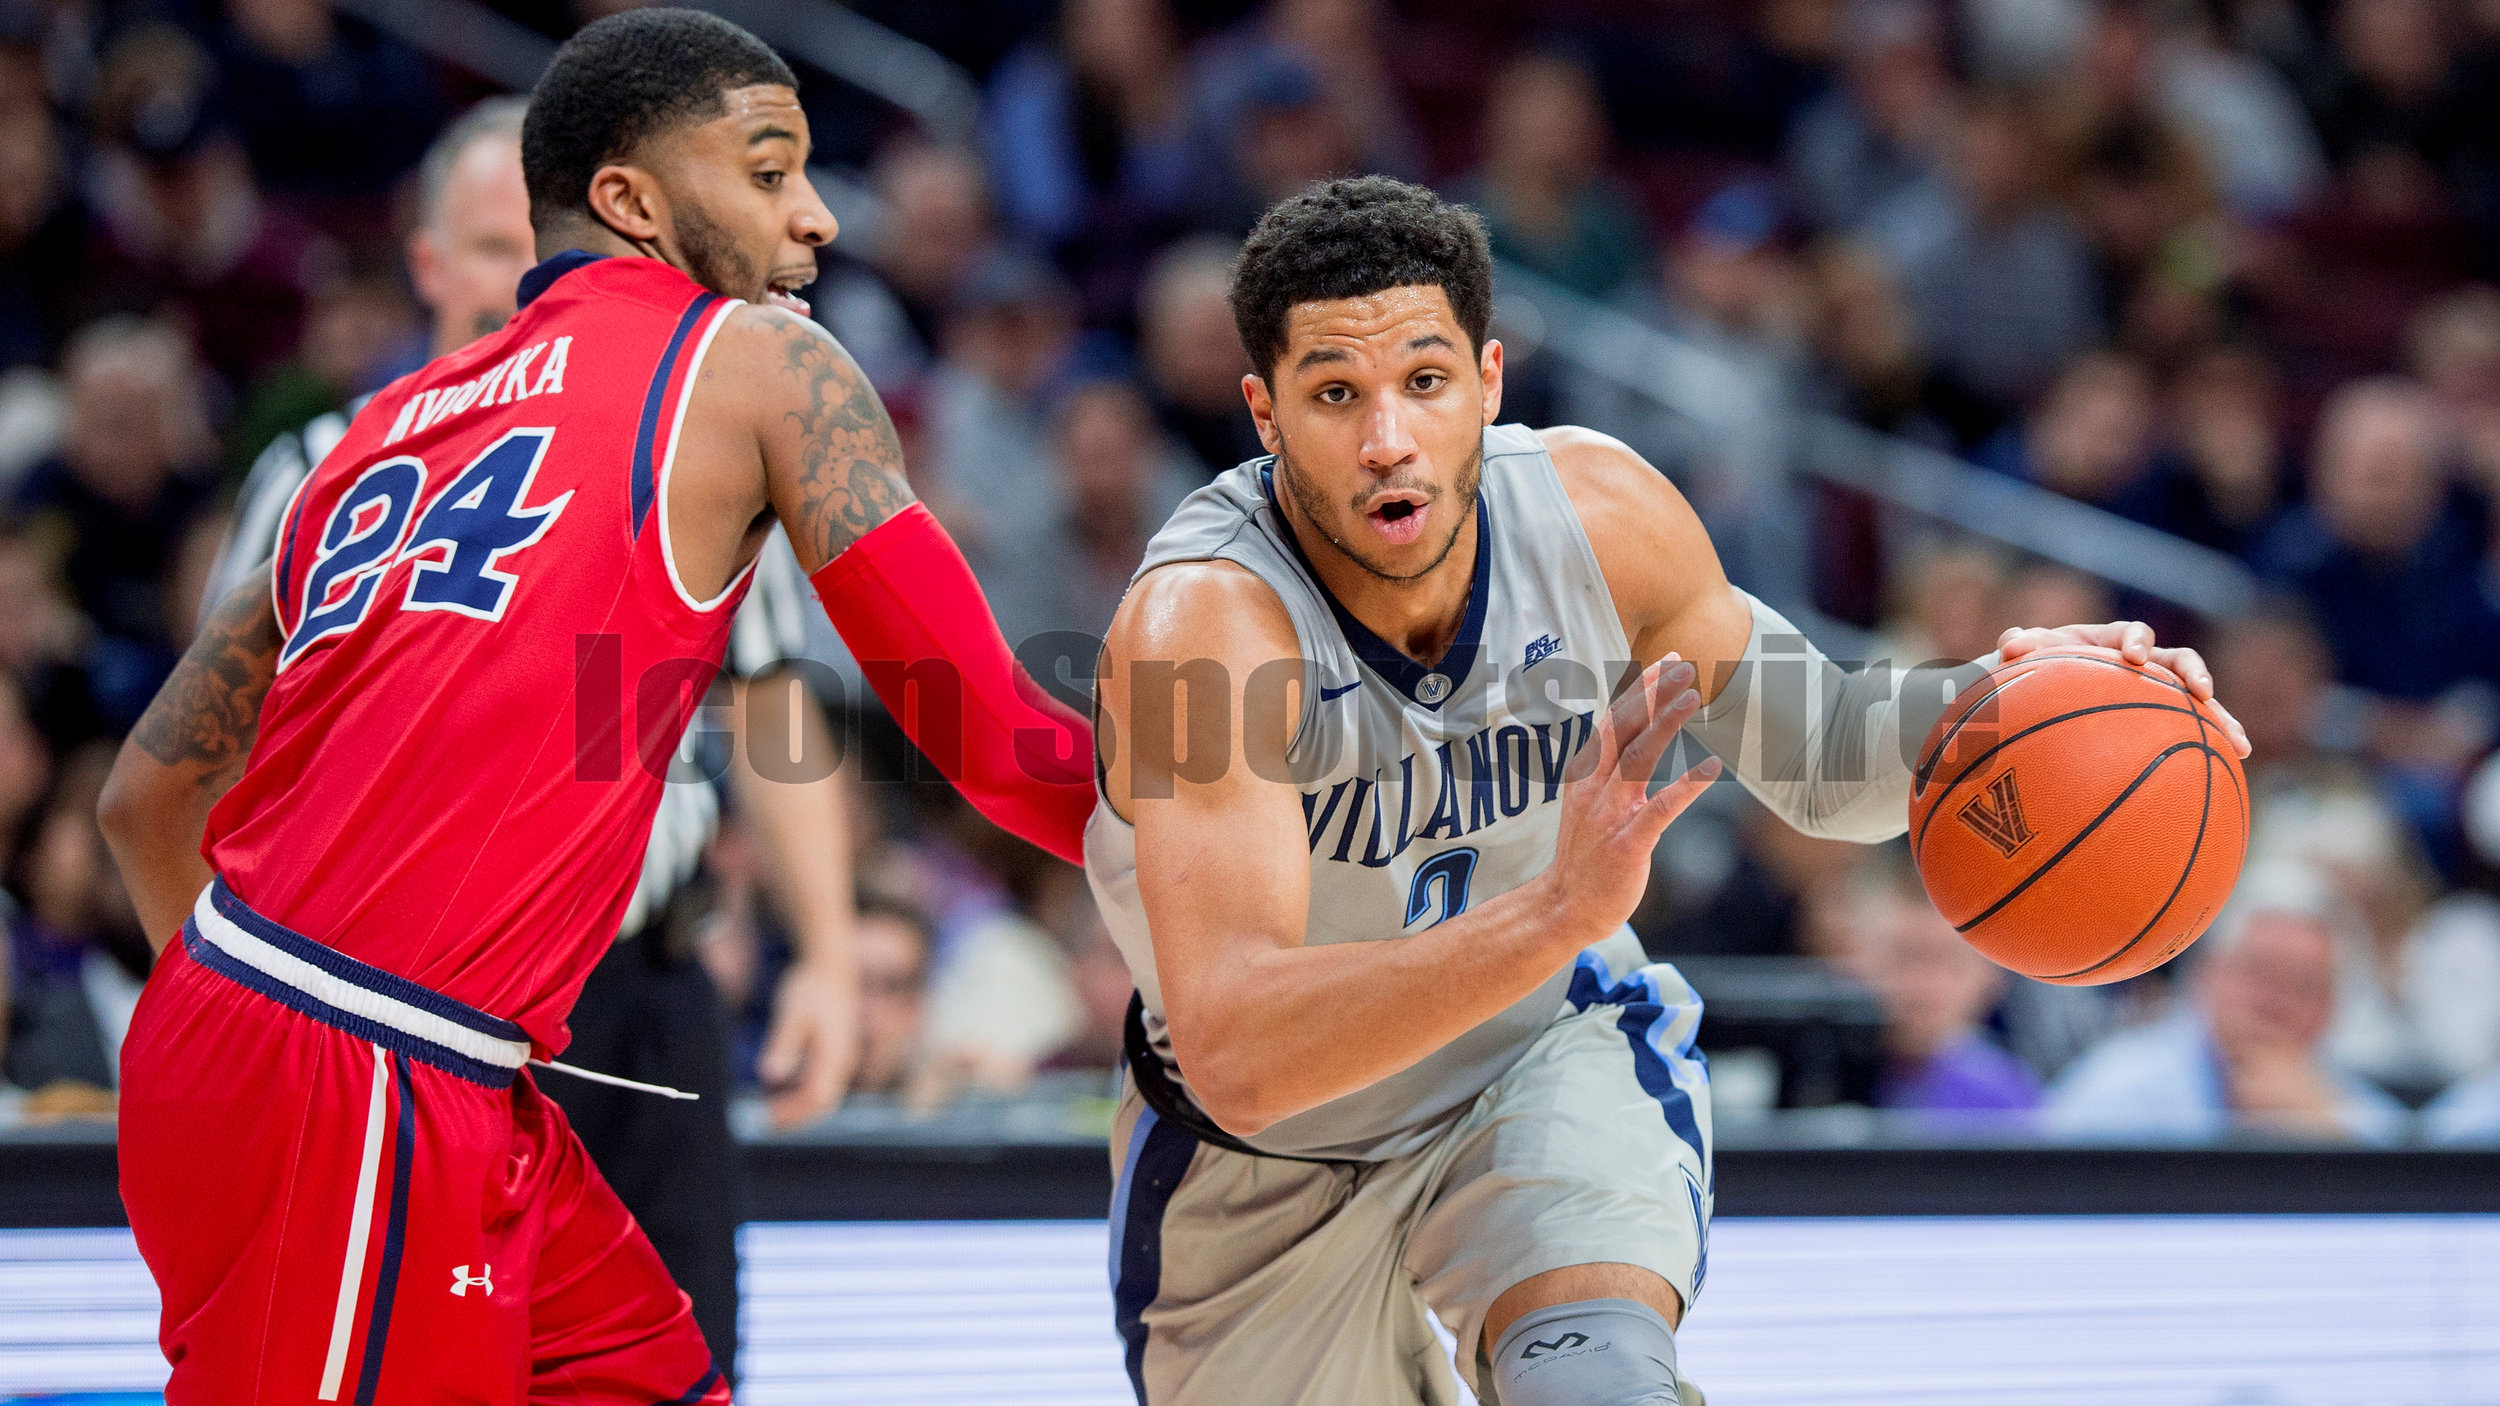  13 February 2016: Villanova Wildcats guard Josh Hart (3) in action charges into the lane during the NCAA basketball game between the St. John's Red Storm and the Villanova Wildcats played at the Wells Fargo Center in Philadelphia, PA. (Photo by Gavi